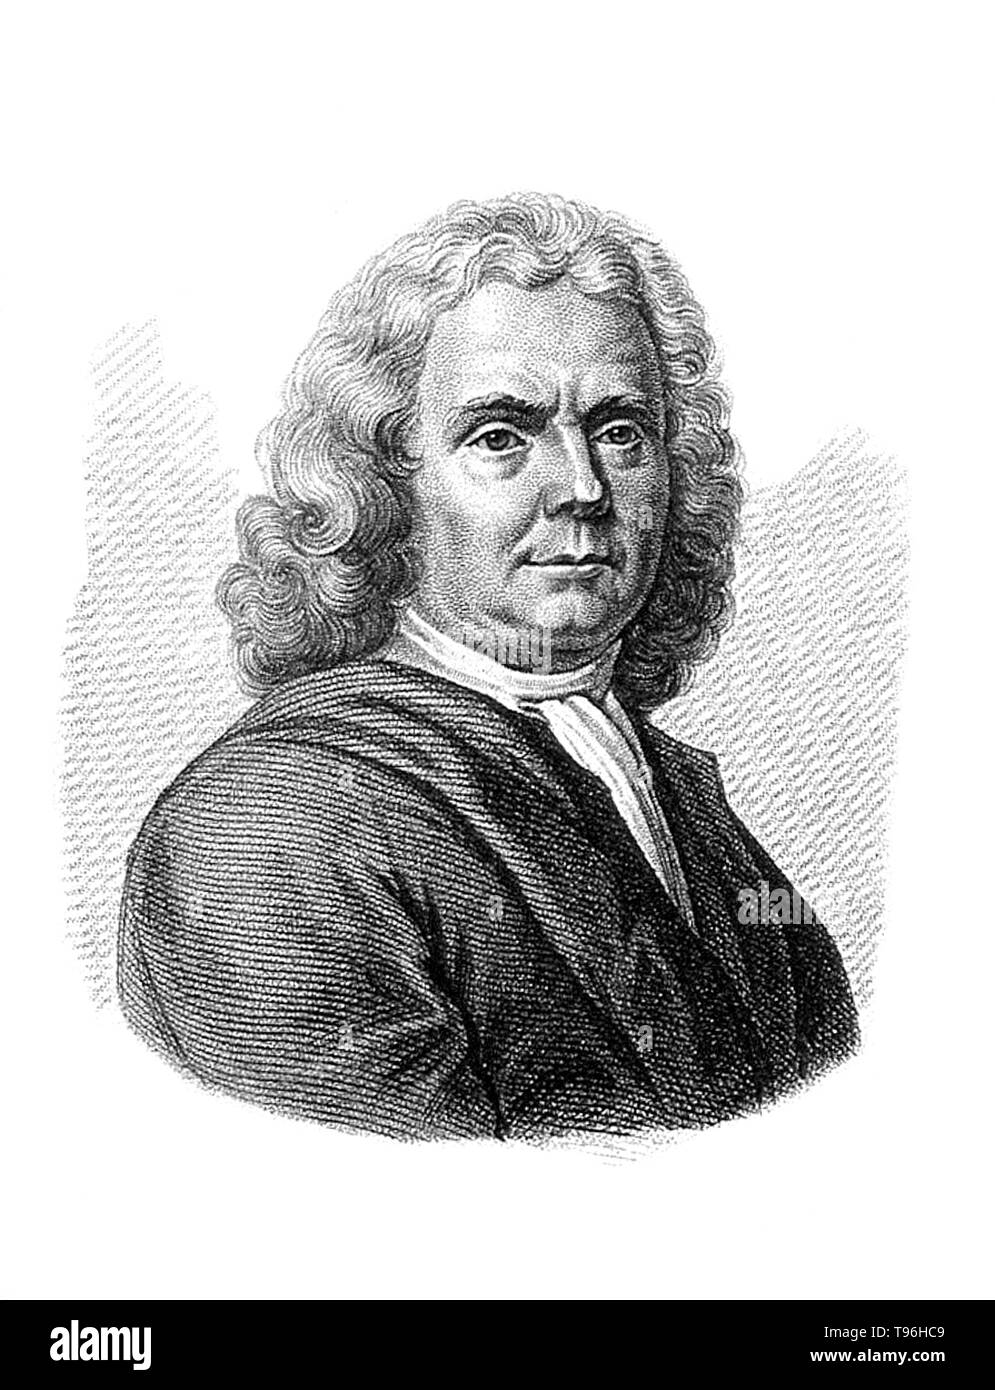 Herman Boerhaave (December 31, 1668 - September 23, 1738) was a Dutch botanist, chemist, humanist and physician, regarded as the founder of clinical teaching and of the modern academic hospital. All the princes of Europe sent him pupils, who found in this skillful professor not only an indefatigable teacher, but an affectionate guardian. In 1714, when he was appointed rector of the university and in this capacity introduced the modern system of clinical instruction. Stock Photo